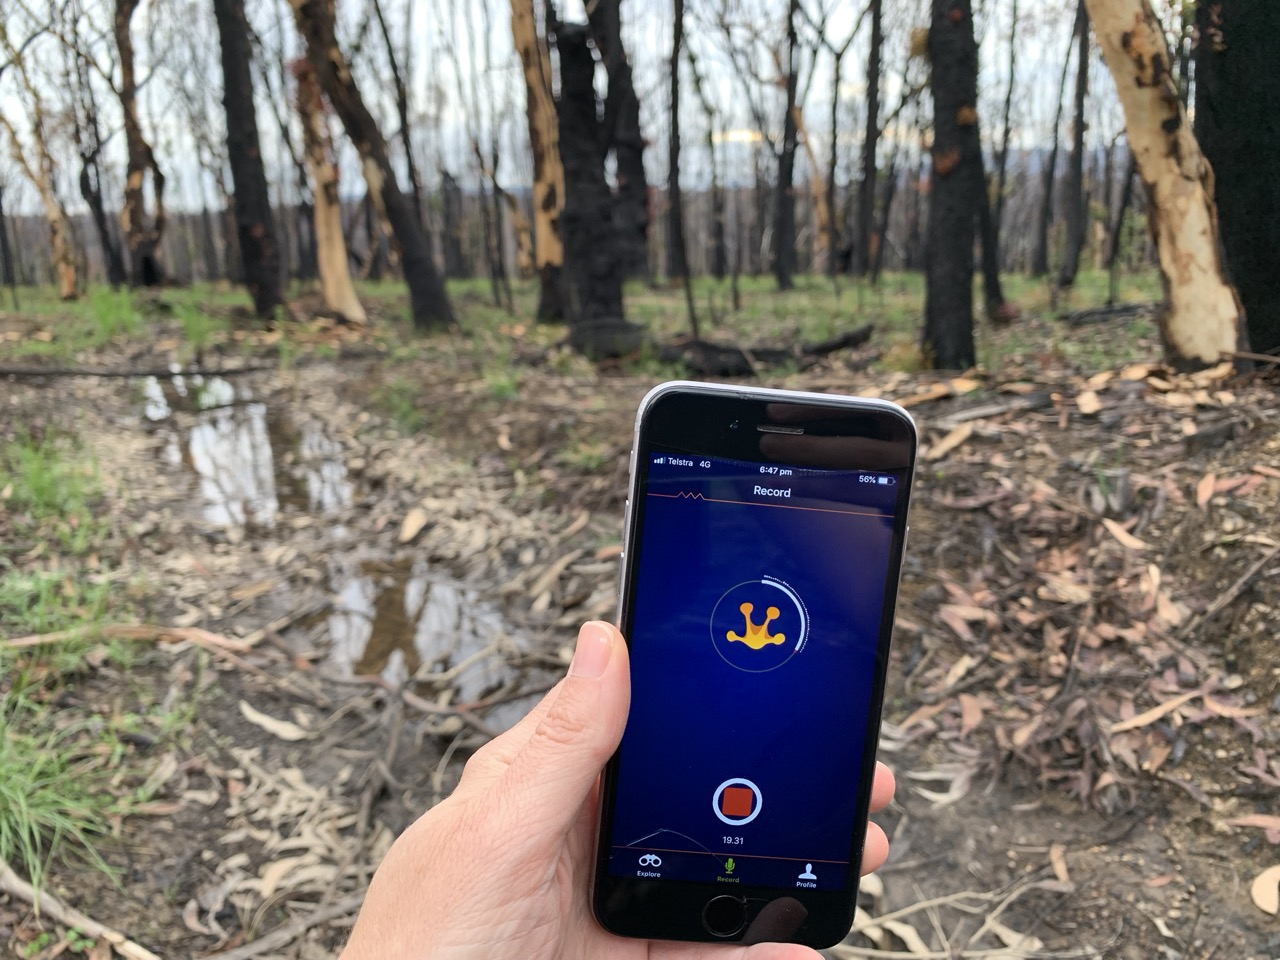 FrogID app being used in Bilpin, NSW after the 'Black Summer' bushfires.